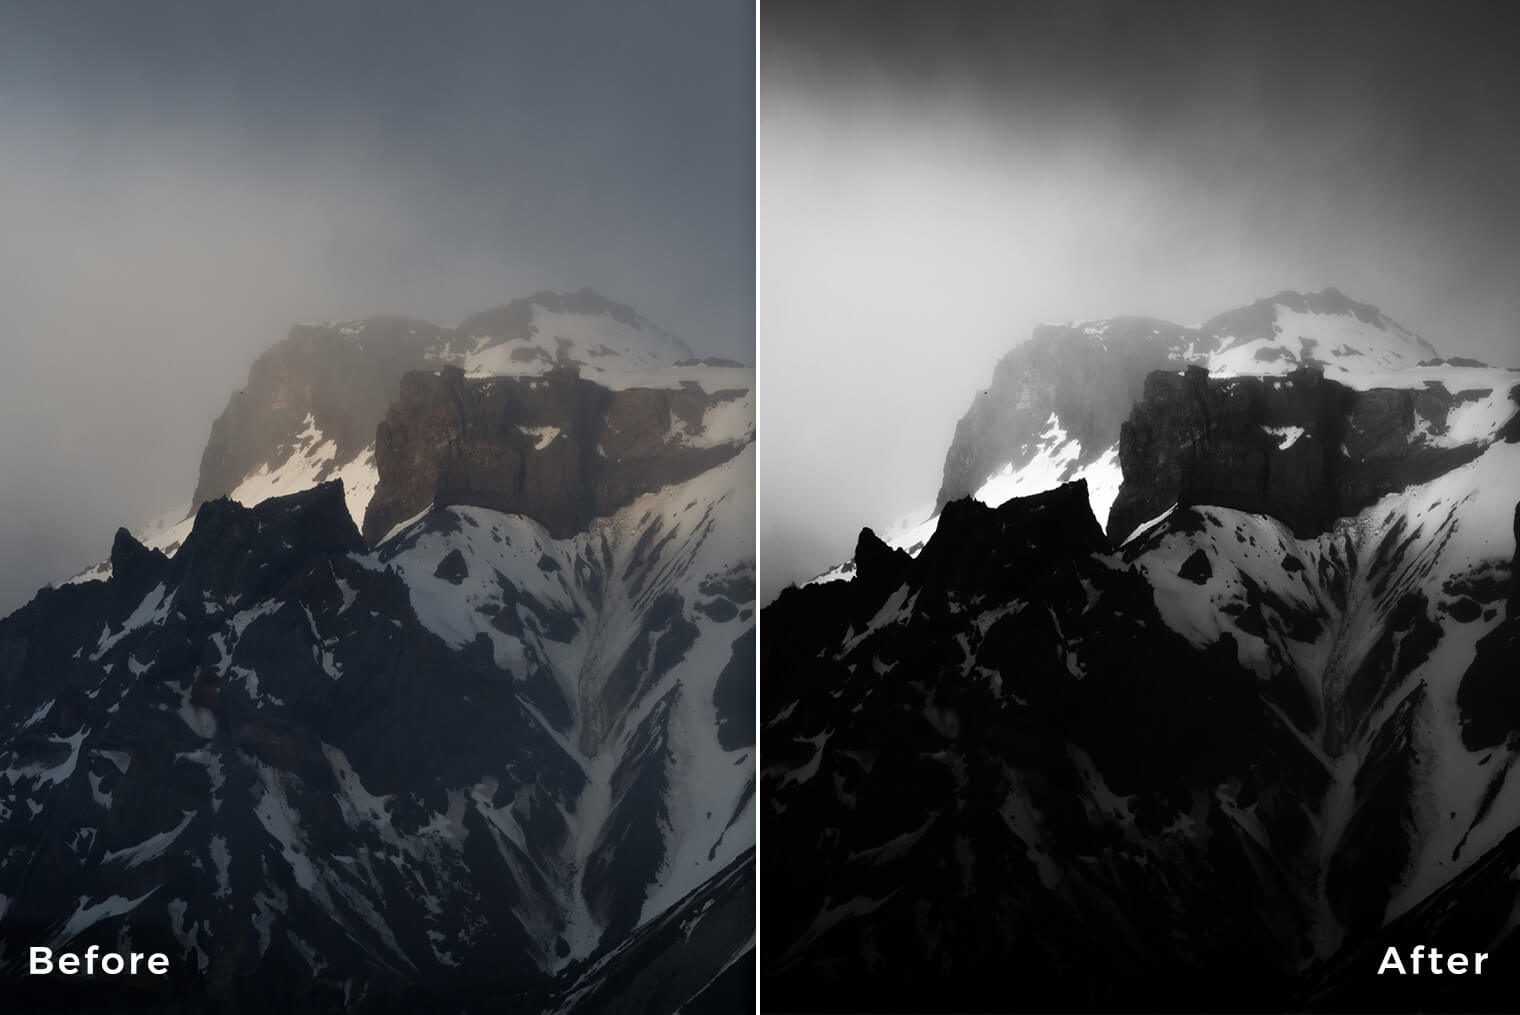 Lightroom Presets for Black & White Mountain Photography